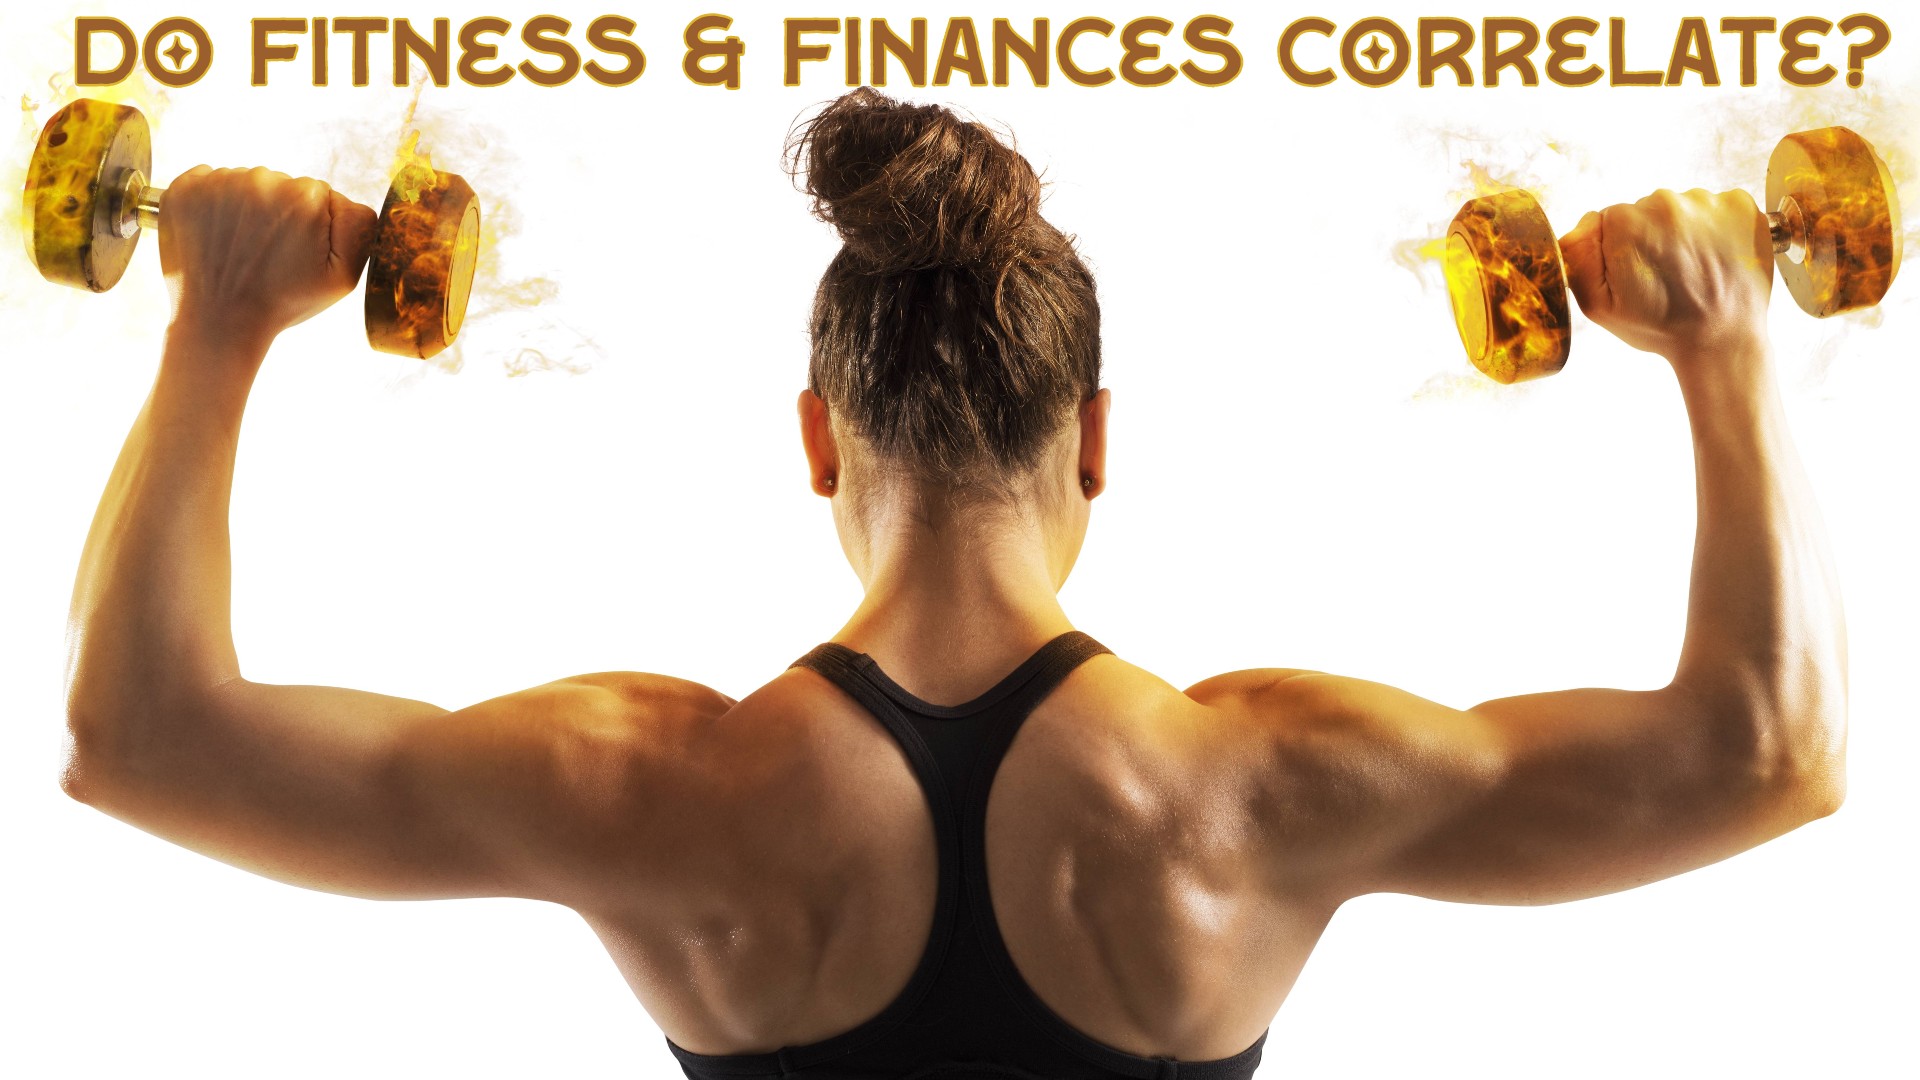 Are Fitness & Finance Correlated?